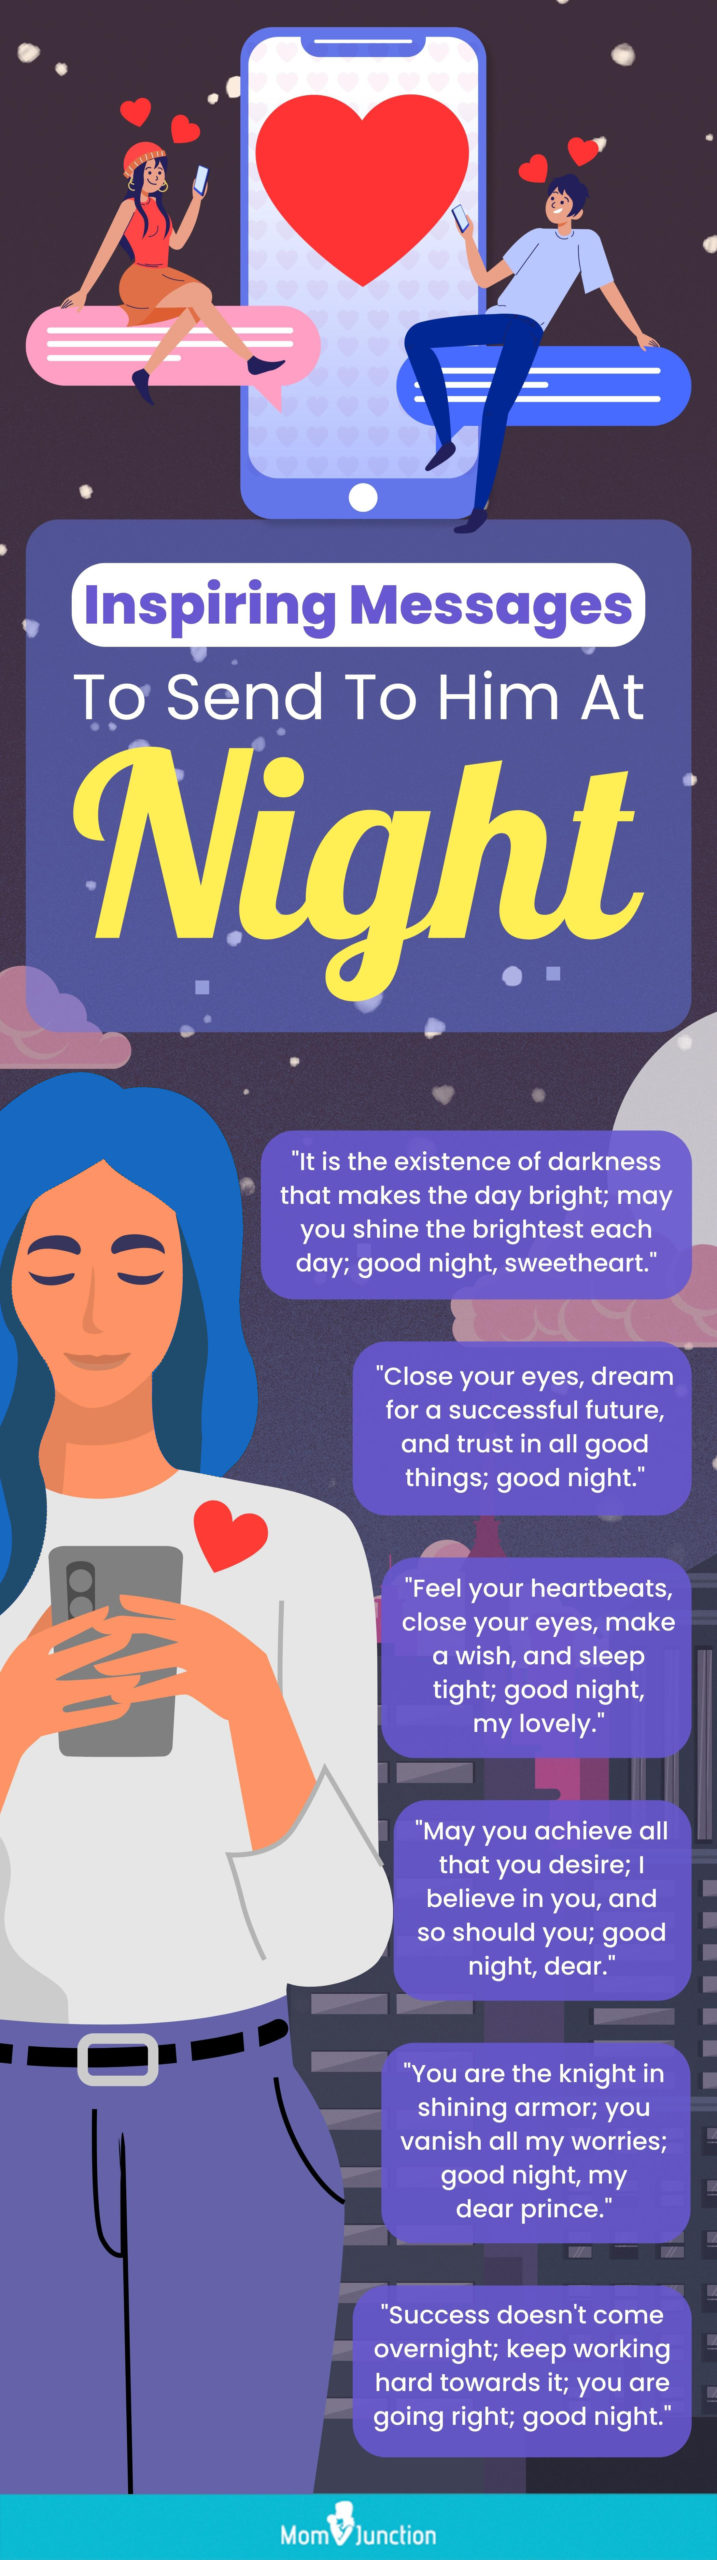 good night message for him (infographic)